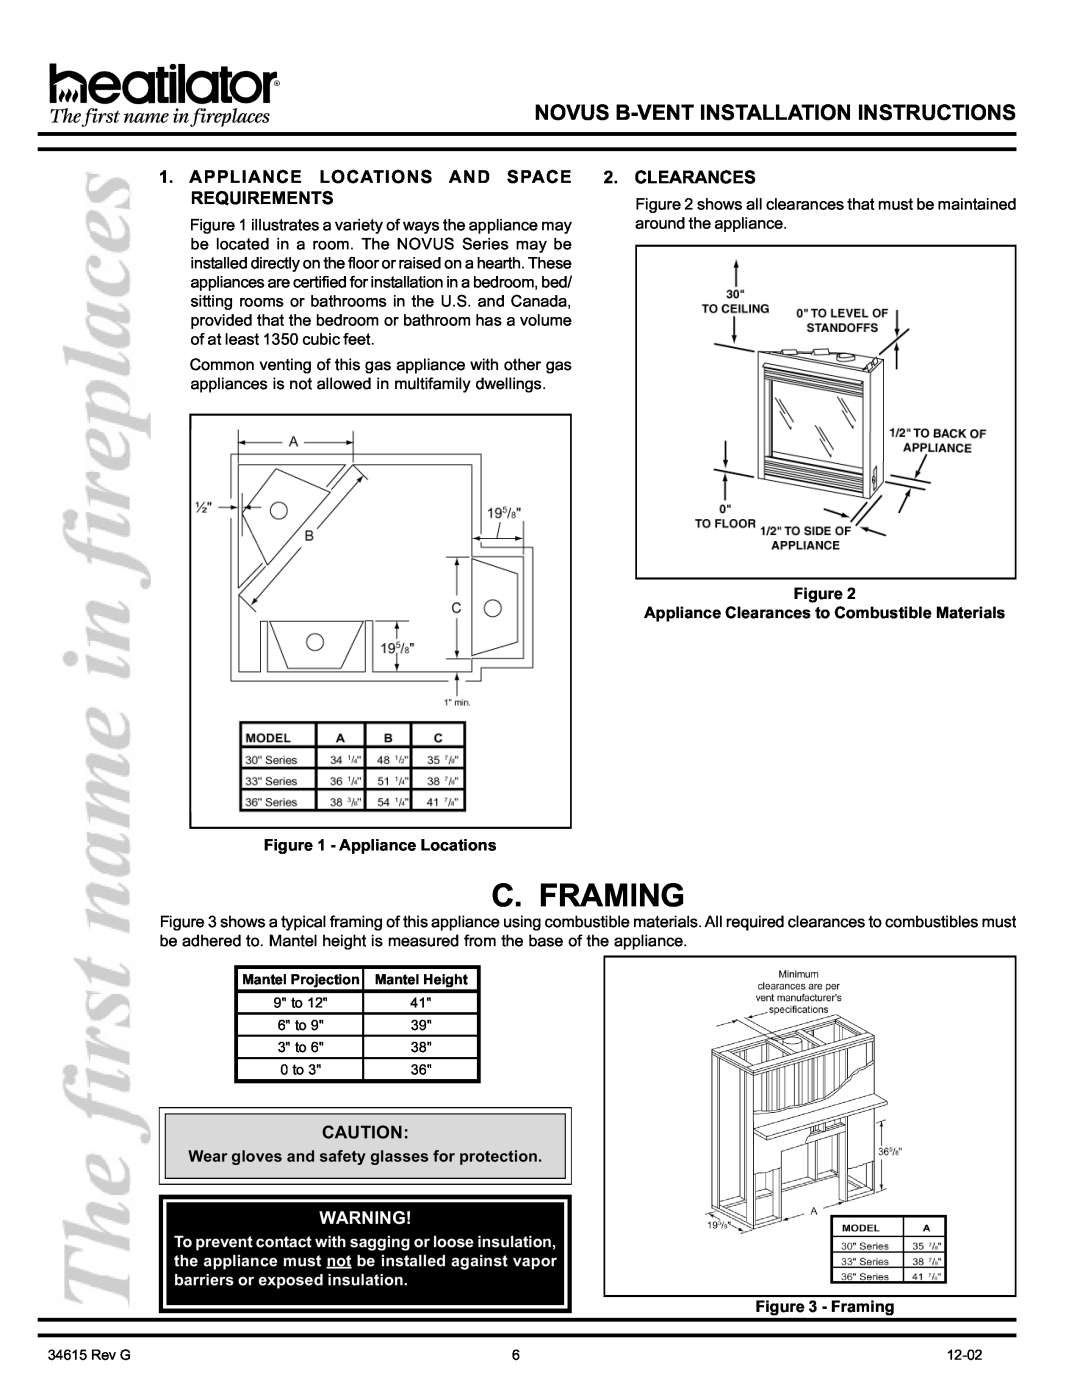 Hearth and Home Technologies GNBC30, GNBC36, GNBC33 manual C. Framing, Appliance Locations And Space Requirements, Clearances 